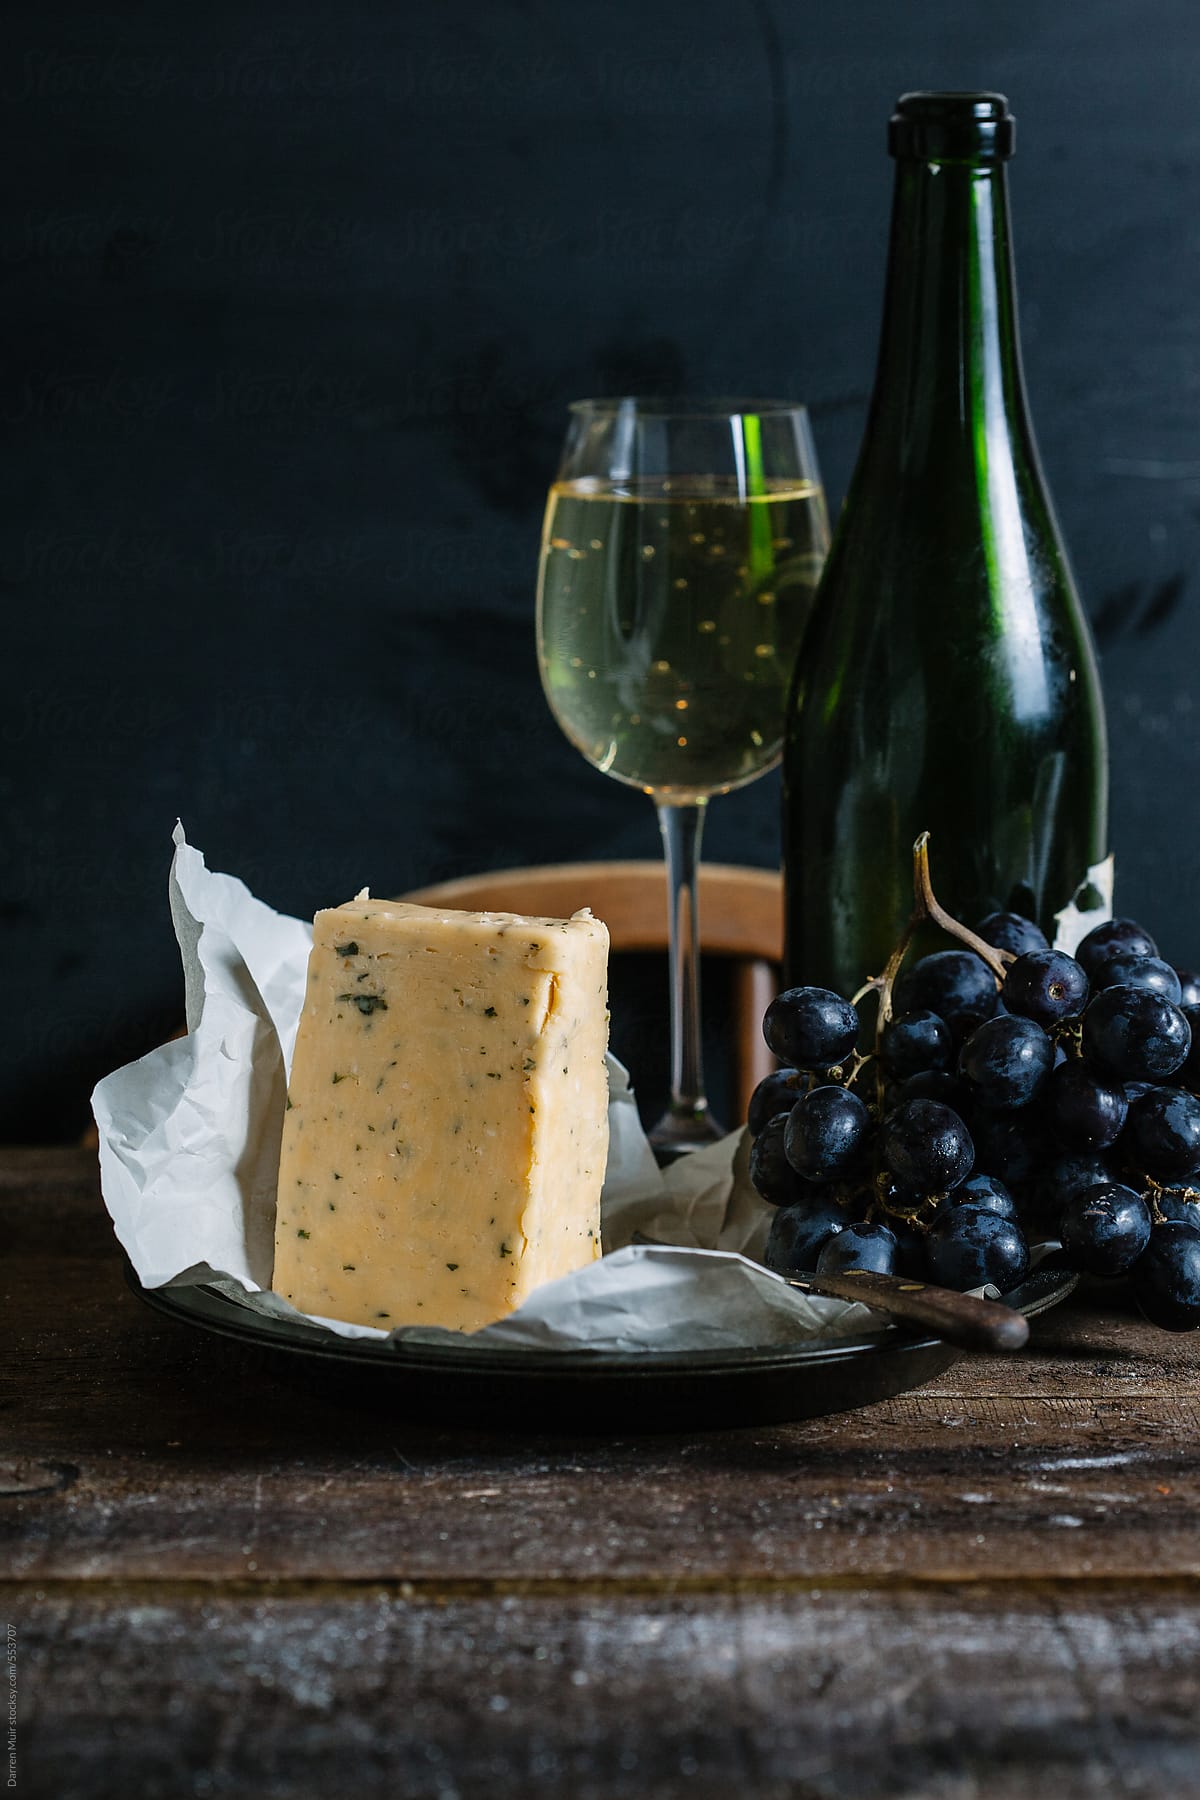 Cheese,grapes and wine on wooden table with dark background. Side view.